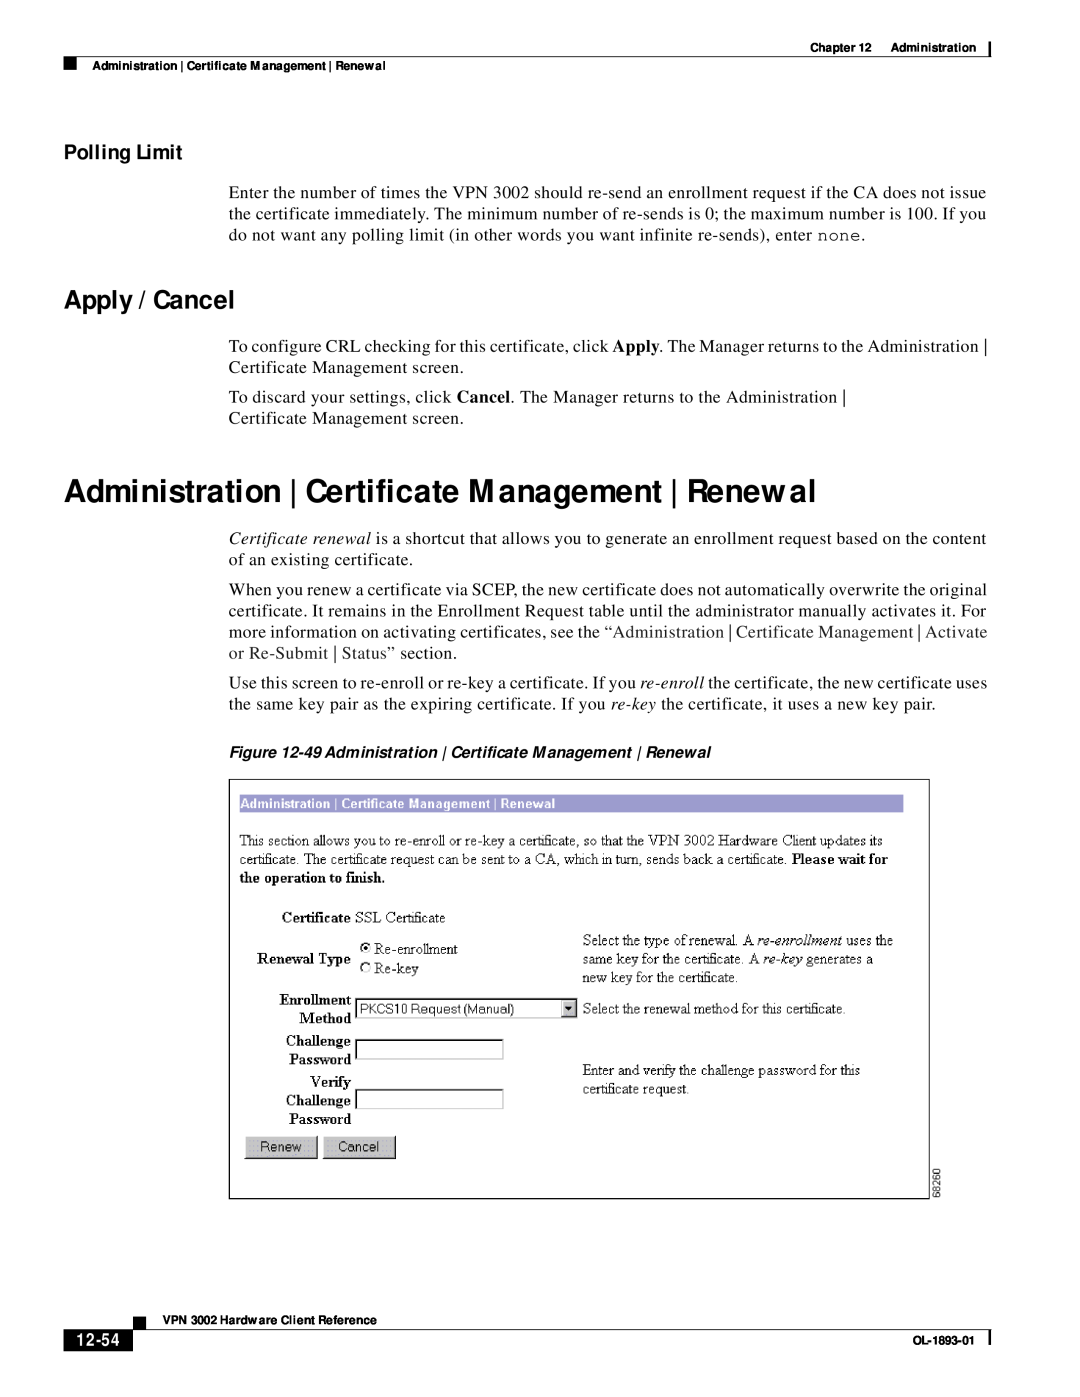 Cisco Systems VPN 3002 manual Administration | Certificate Management | Renewal, Polling Limit, 12-54, Apply / Cancel 